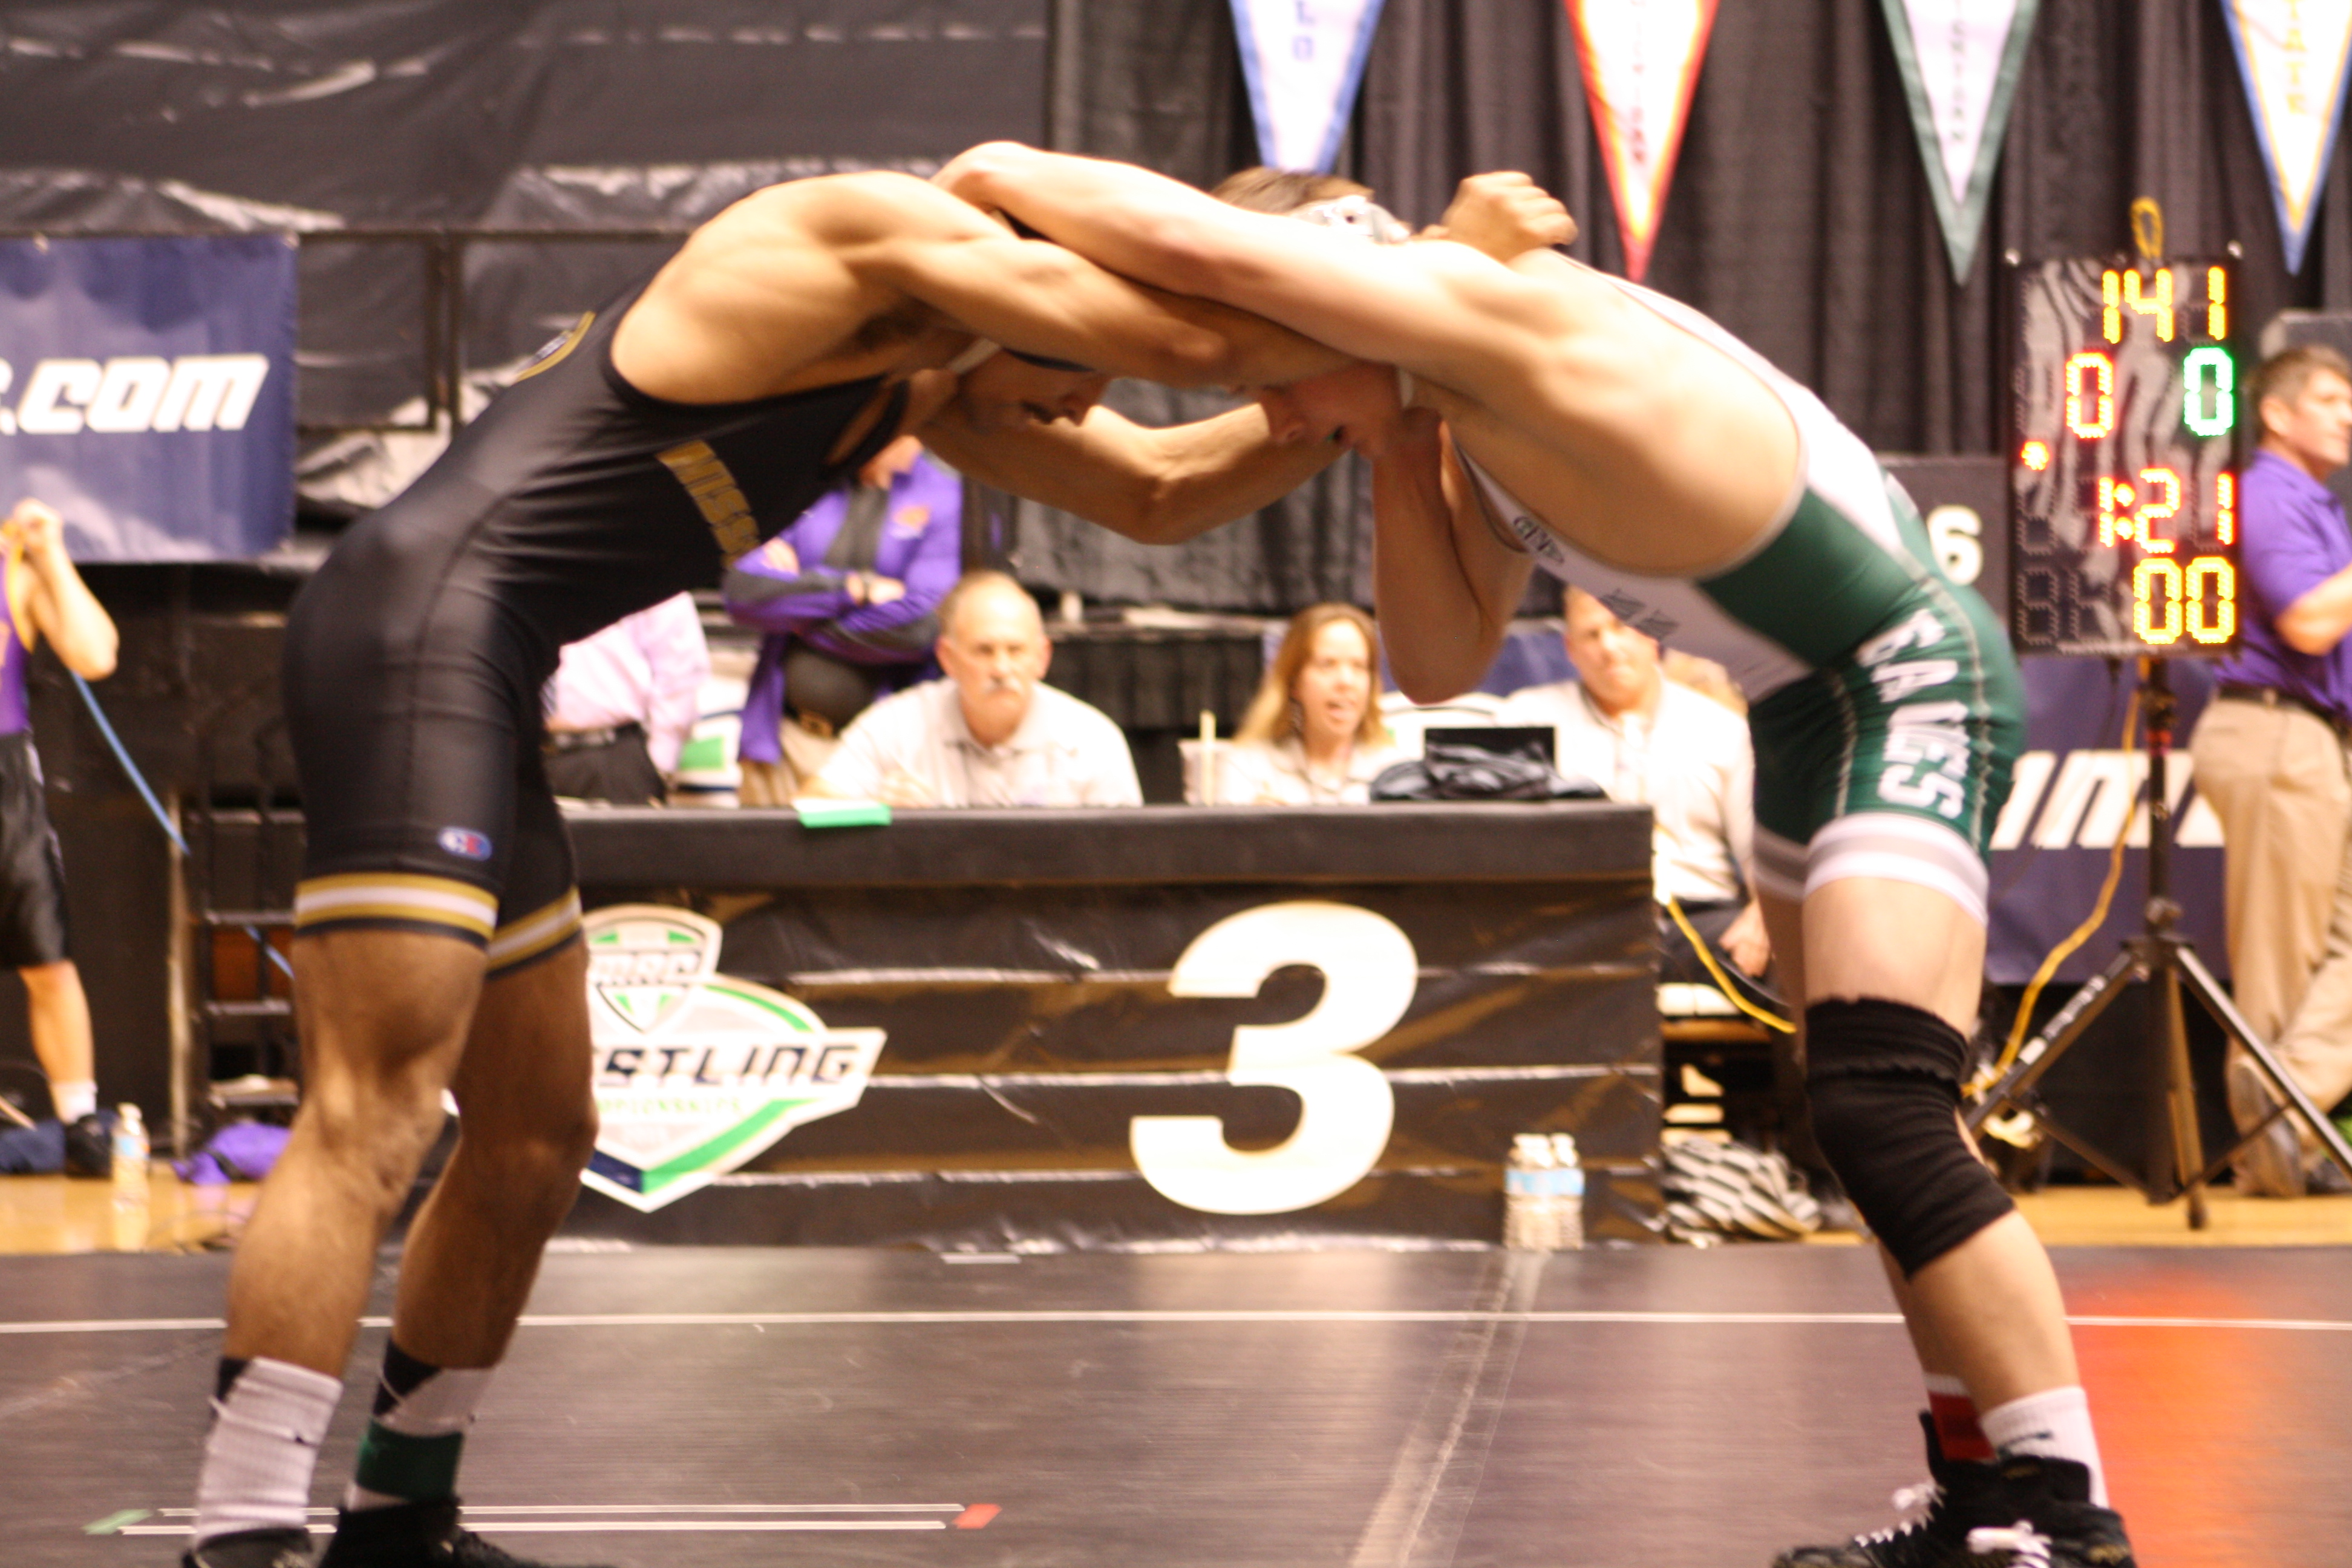 Could be the biggest match of the season for Lavion Mayes against #4 Sueflohn of NU